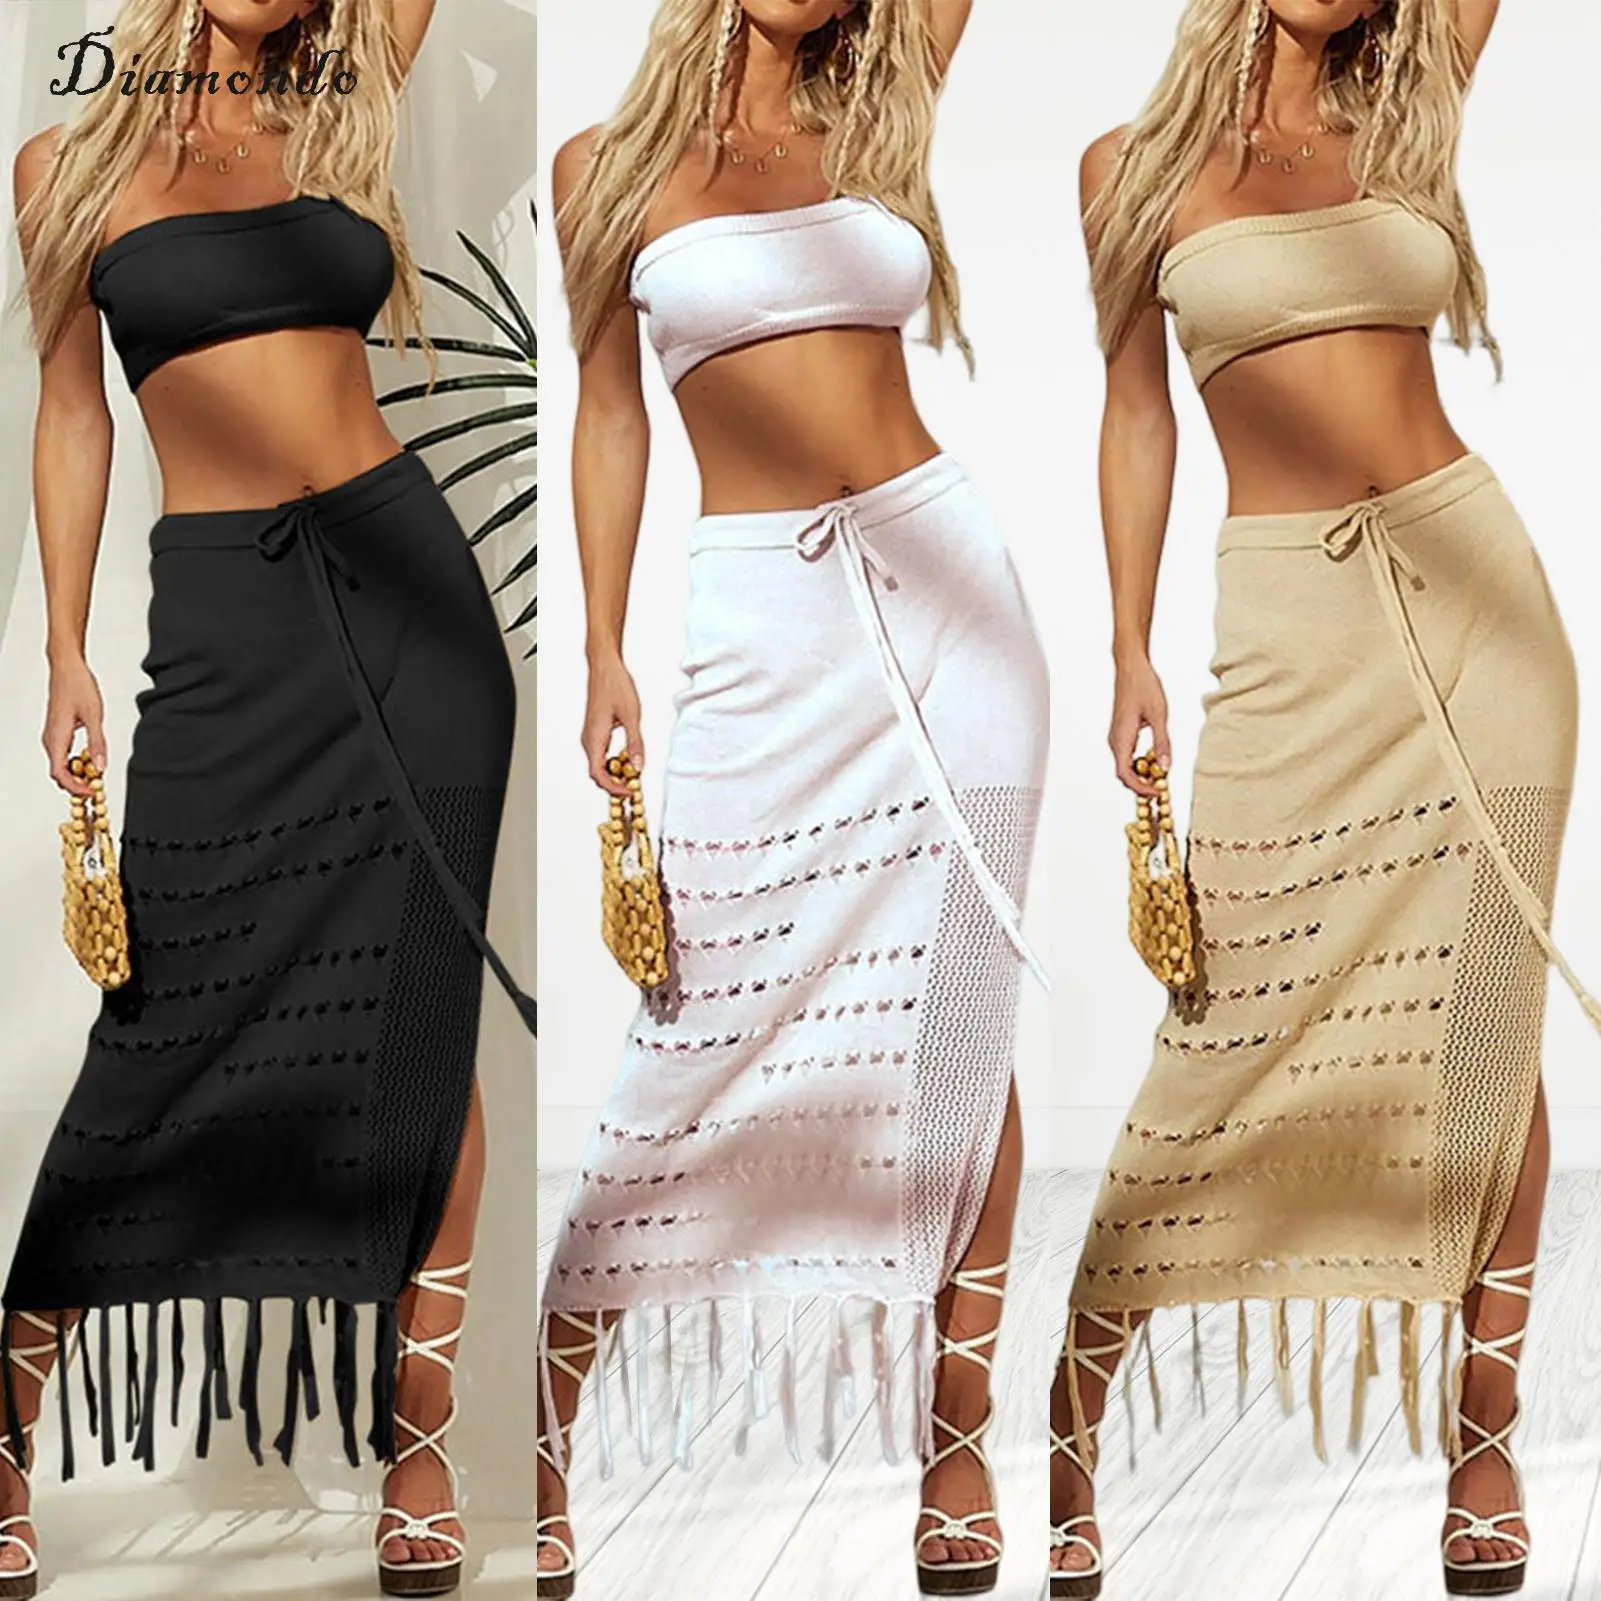 

Women Bikini Blouse Top Long Skirt Navel Exposed Tassels Hem Strapless Top Bodycon Skirt Solid Color Y2K Style Casual Daily Suit